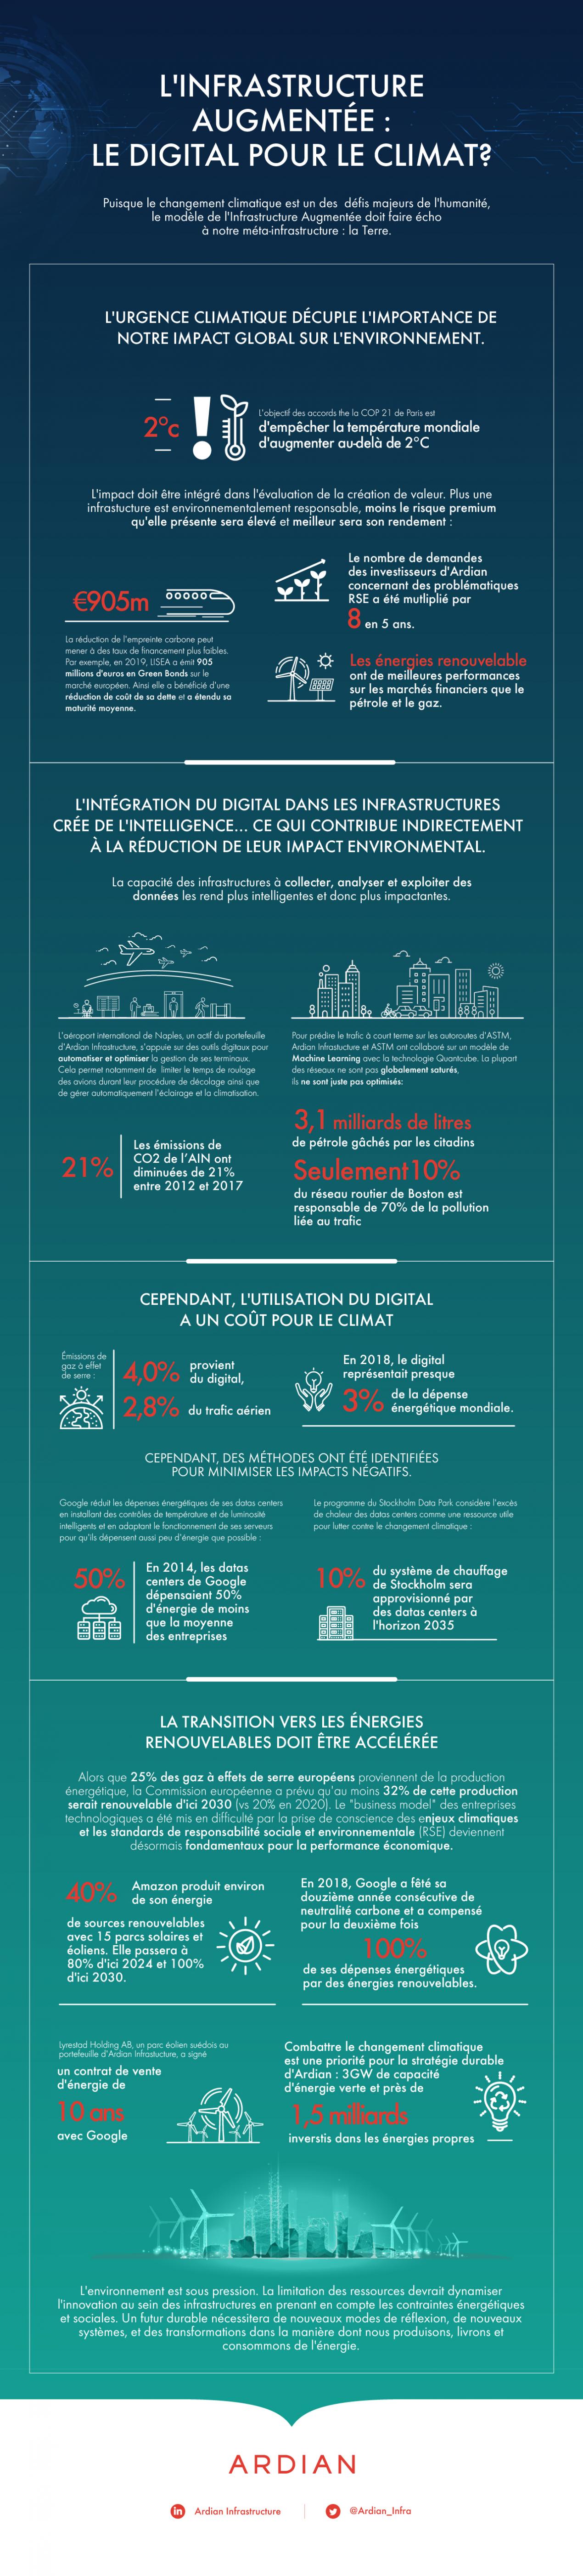 Infographic Augmented Infrastructure: Digital for climate?